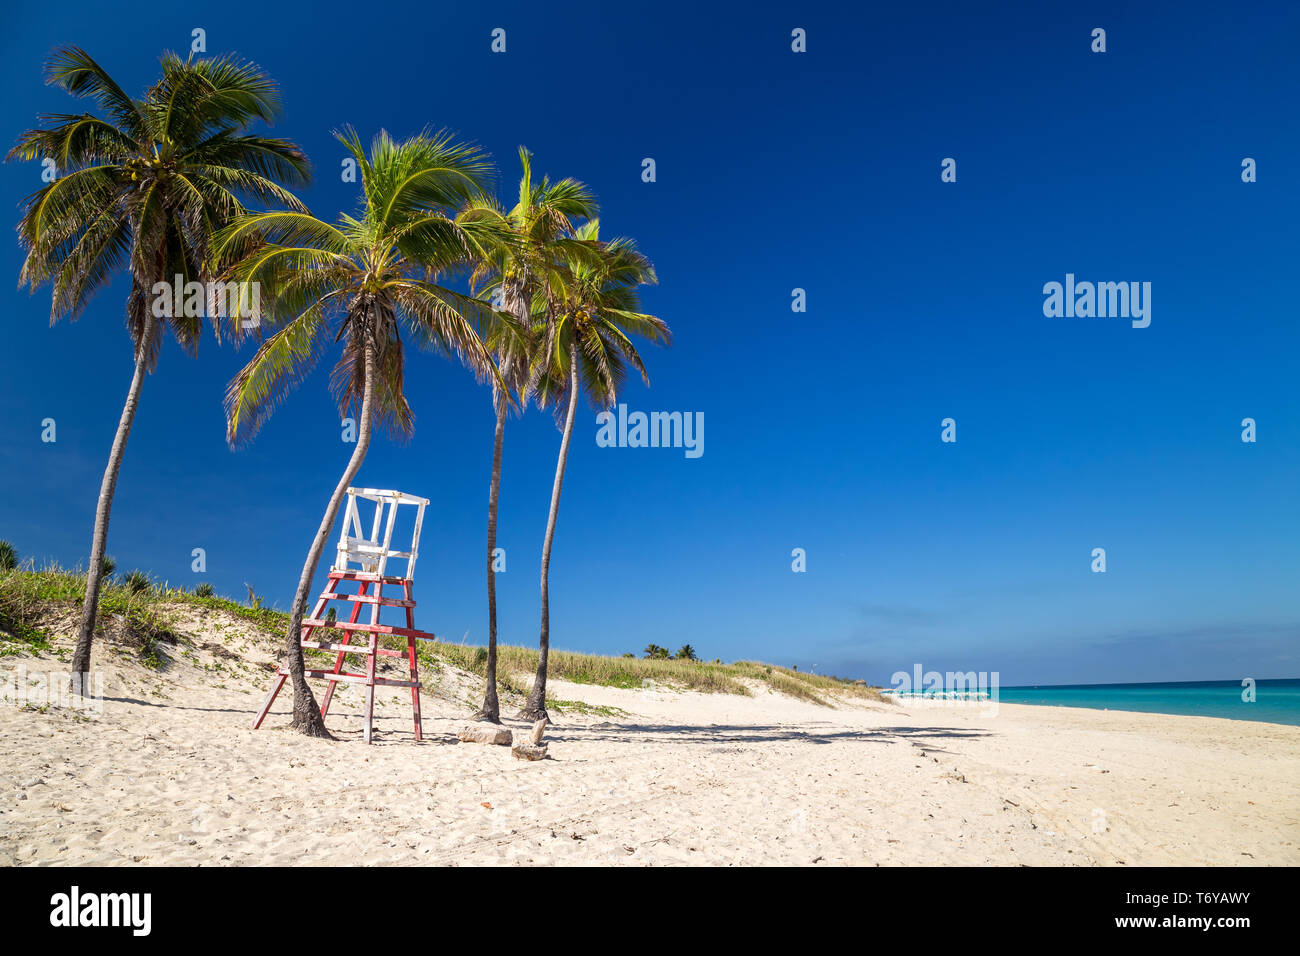 Lifeguard chair under palm trees on a paradise beach Stock Photo